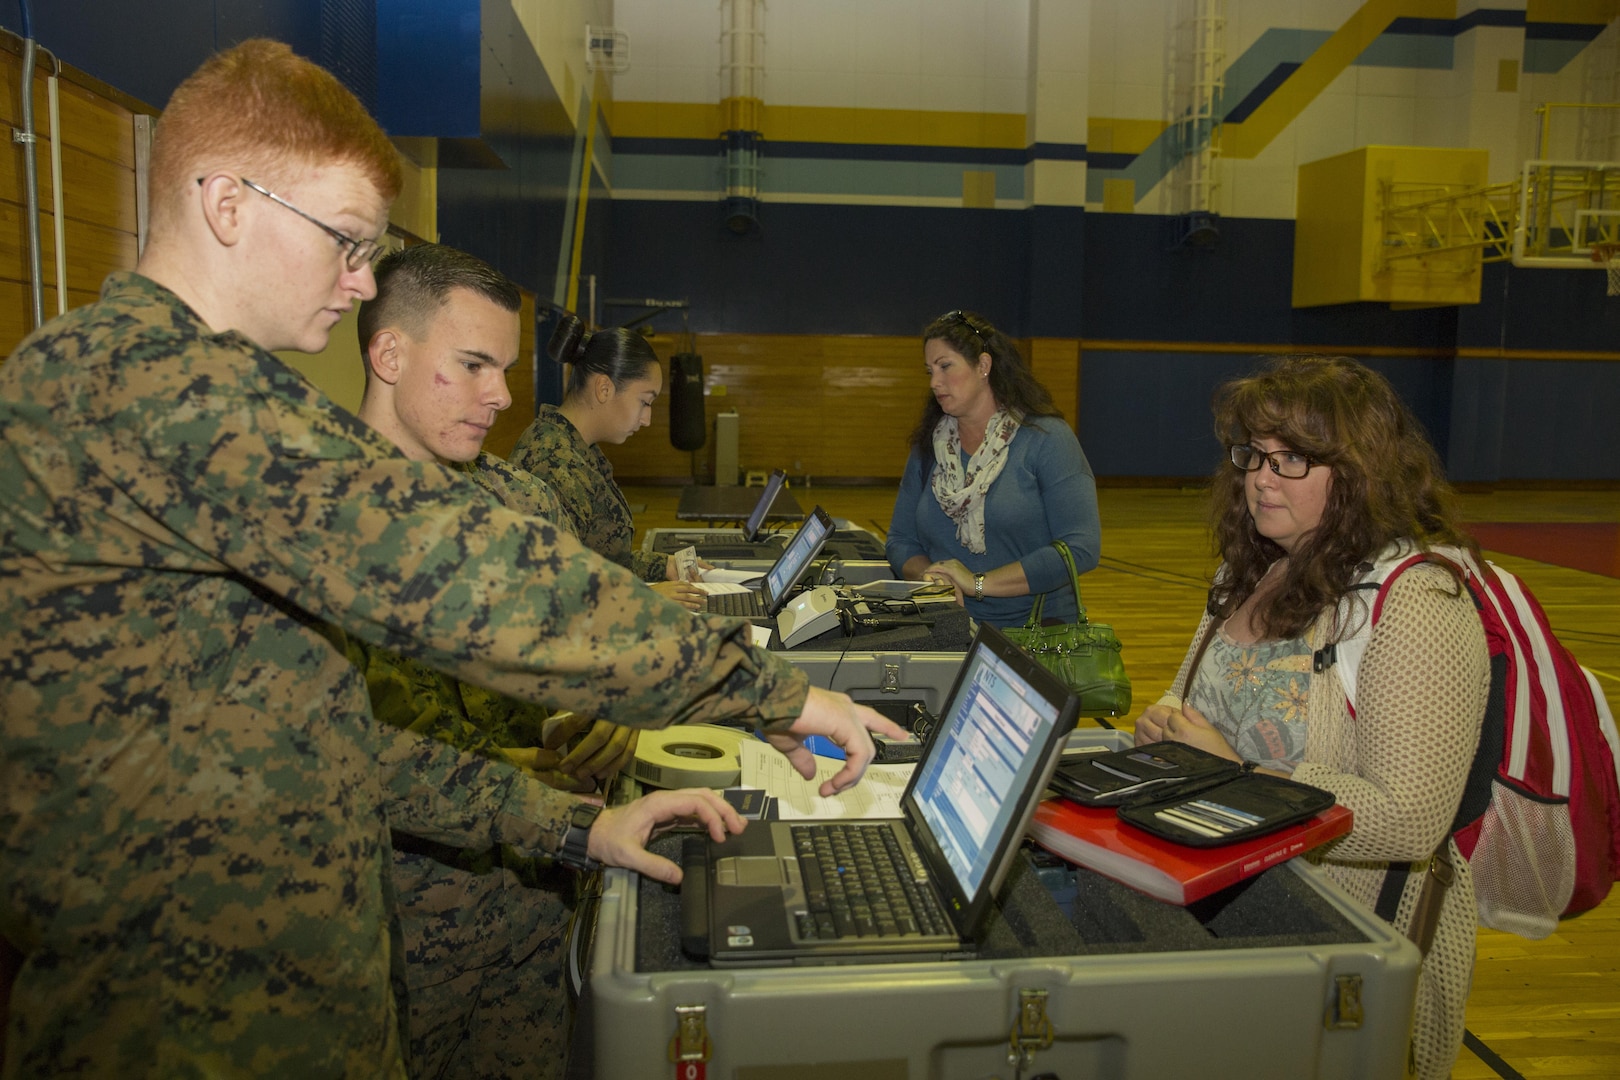 From left to right, Lance Cpl. David Walker, Pfc. Damian Cooper and Pfc. Julie Cary, administrative specialists with the Installation Personnel Administration Center, gather information from residents during a noncombatant evacuation processing center exercise in the IronWorks Gym at Marine Corps Air Station Iwakuni, Japan, Dec. 11, 2015. This exercise practices evacuating endangered personnel in a host-foreign nation to a safe location. Evacuees include noncombatants, nonessential military personnel, select host-nation citizens and third country nationals.